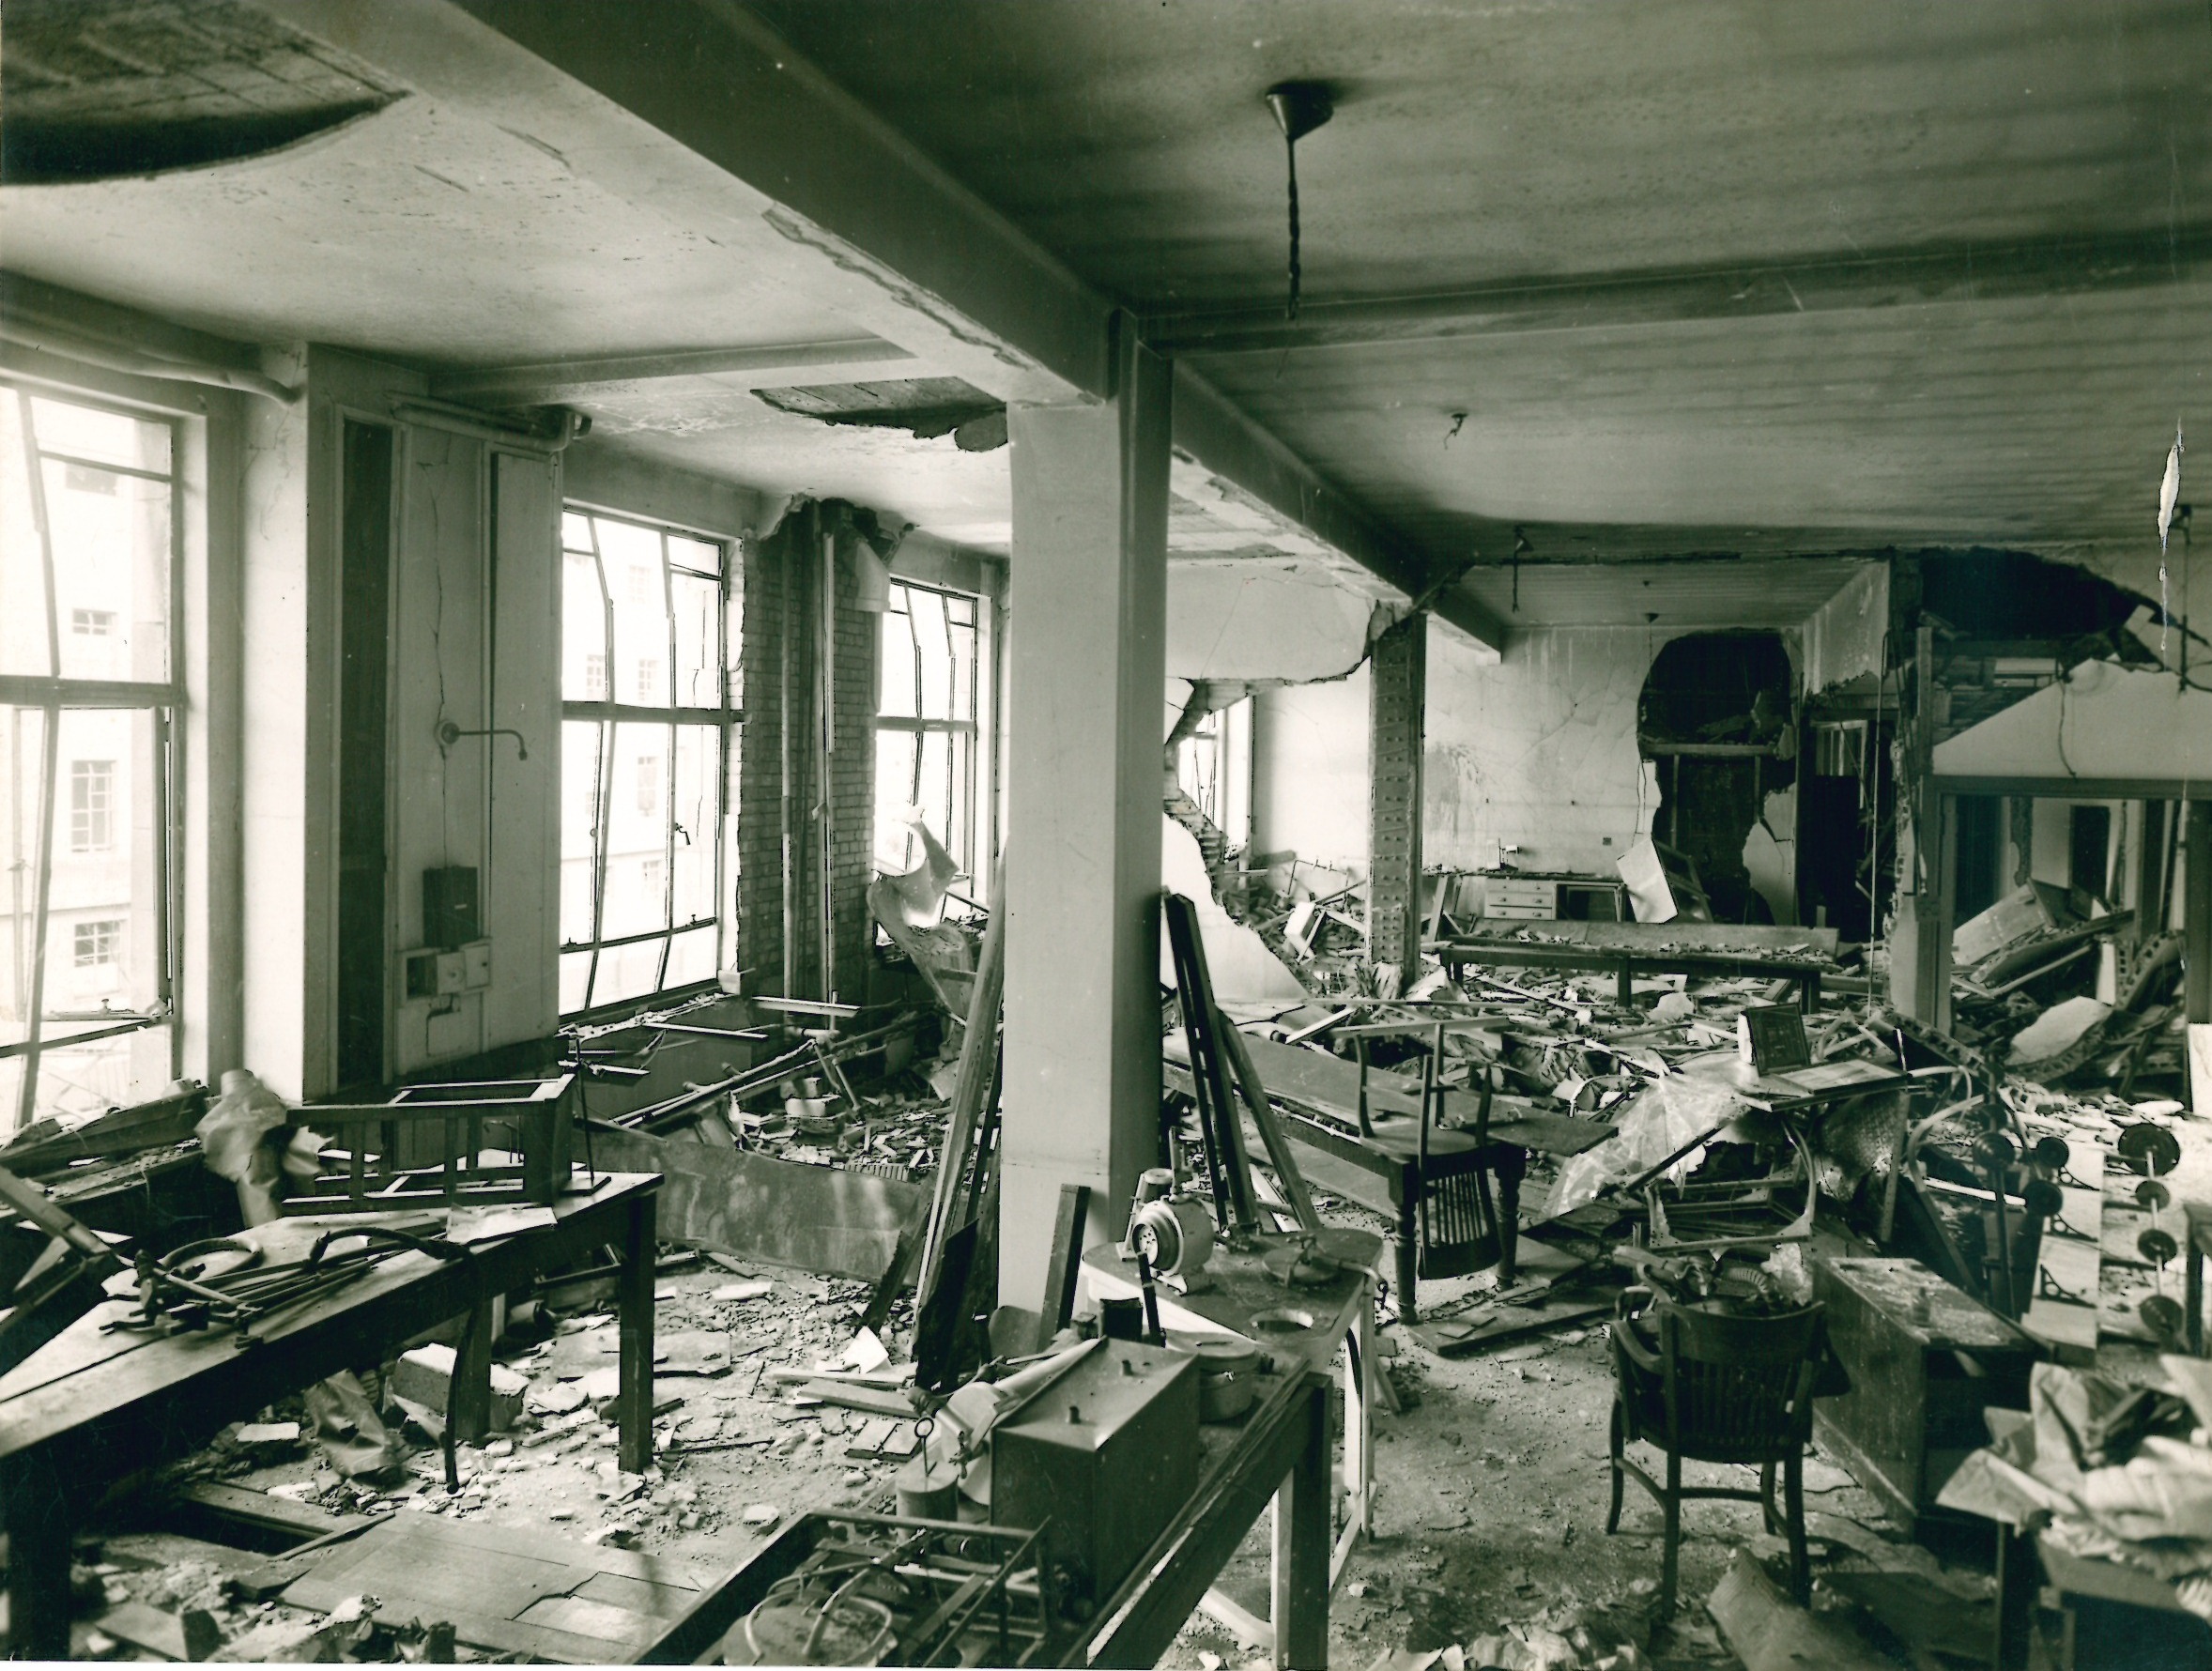 Bomb Damage – Dept of industrial physiology on 1st floor